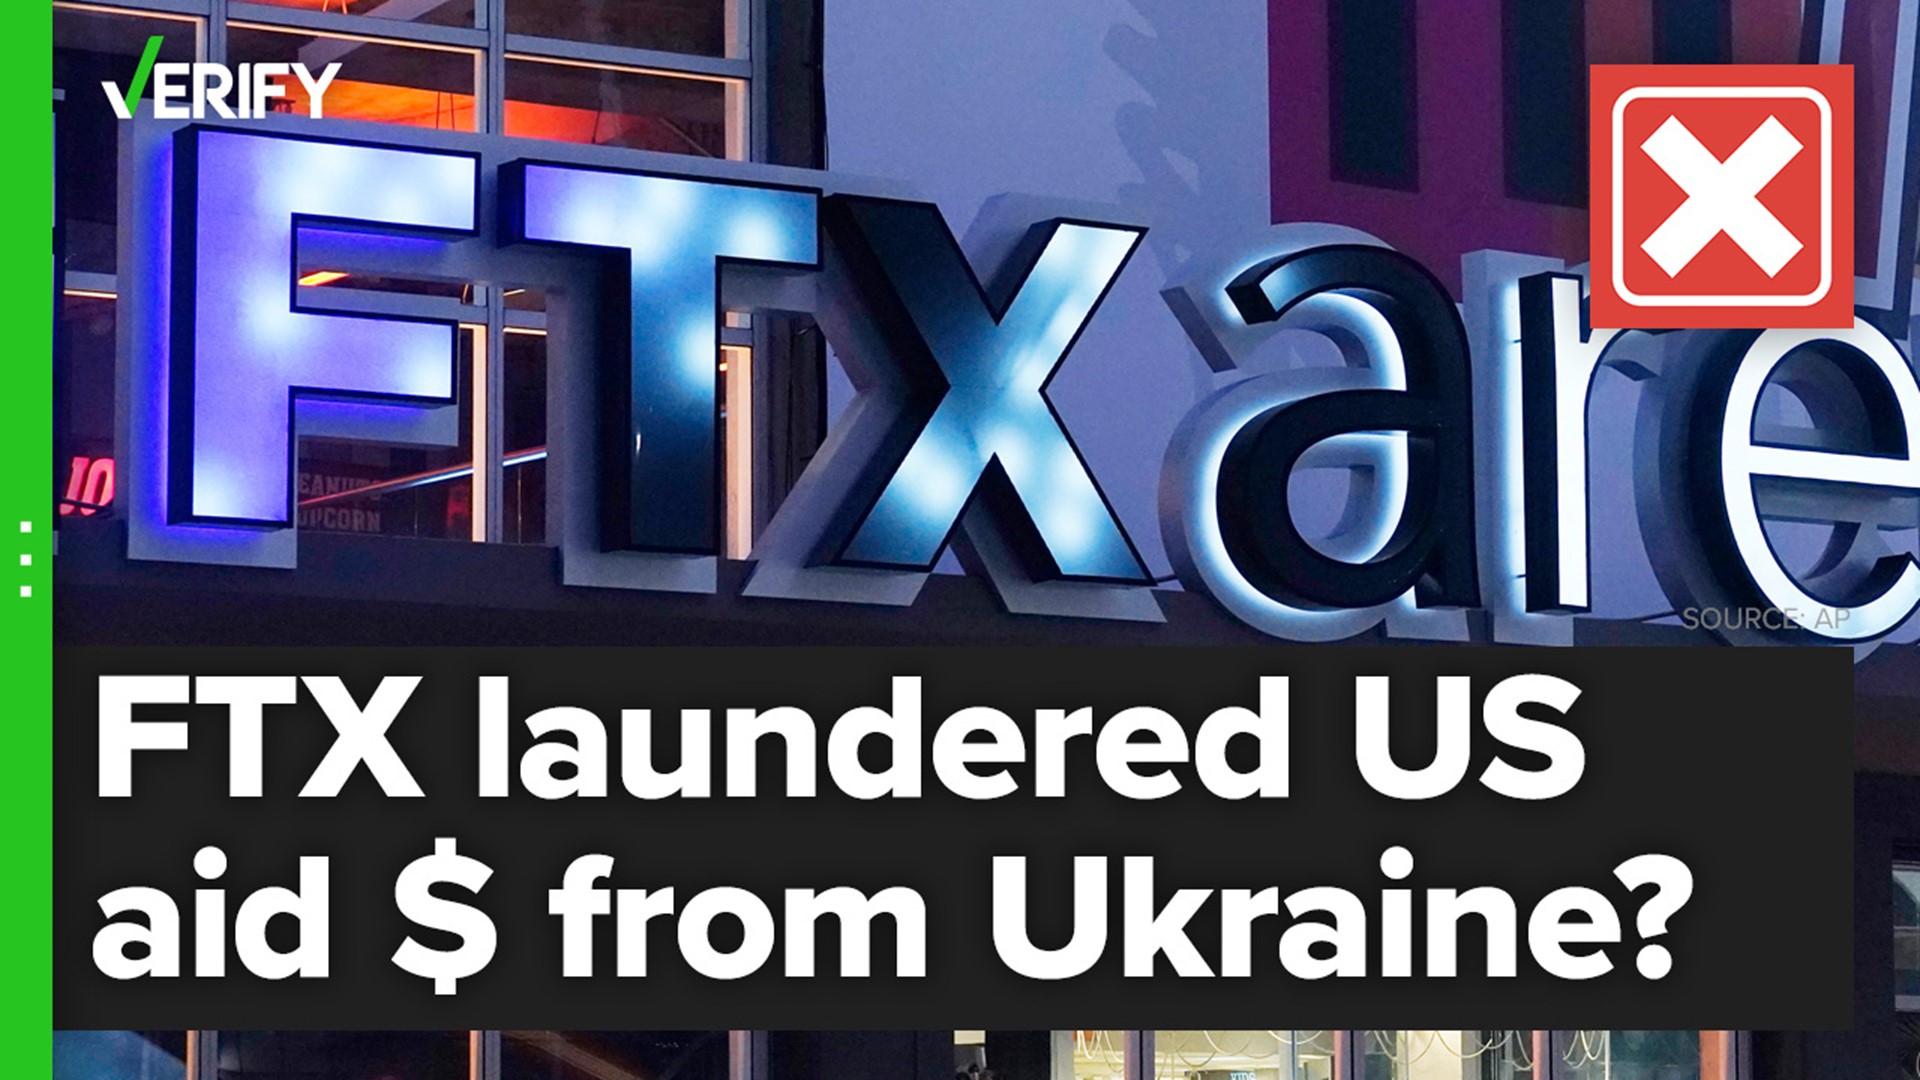 Crypto exchange FTX did help with a fundraising site for Ukraine. But there’s no evidence it laundered U.S. aid money back to Democratic lawmakers.